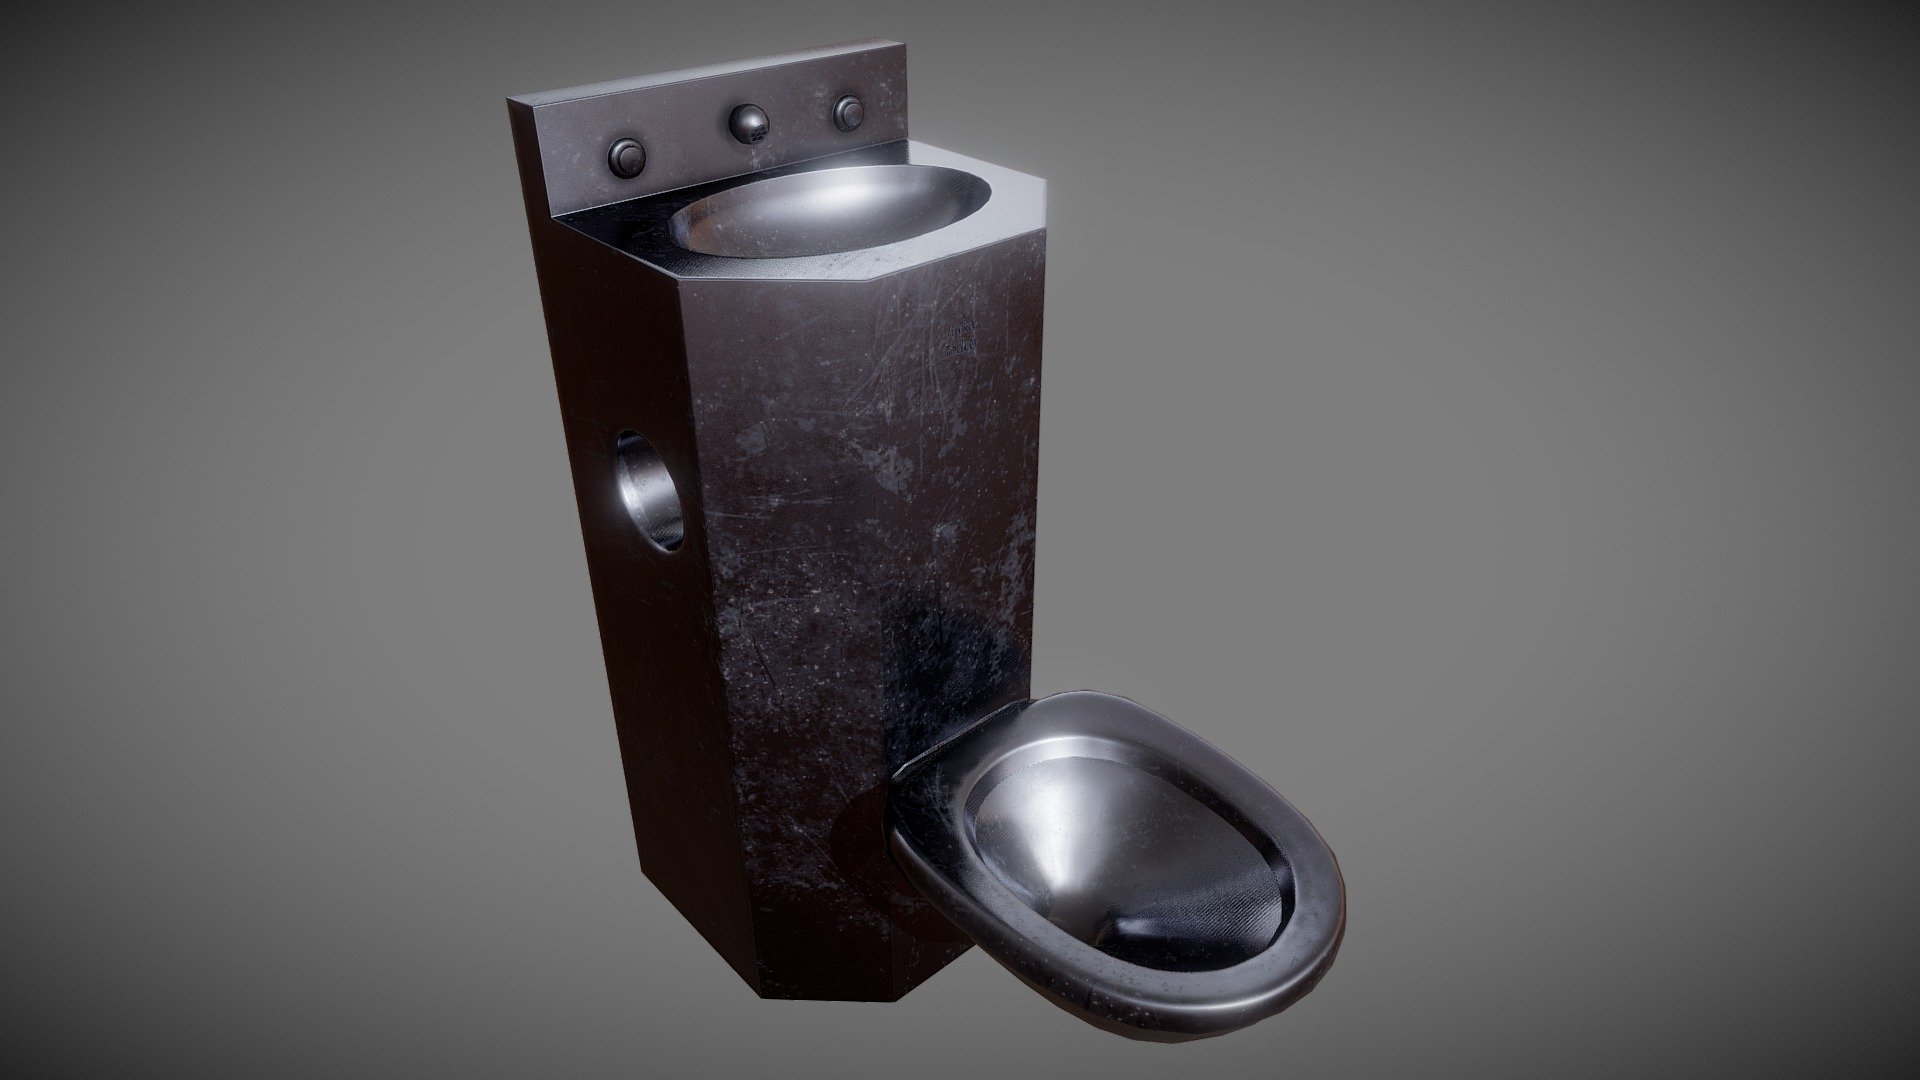 Game asset made in Blender.

PBR Low Poly model of toilet used in prisons. Made with real world scale 43.8 x 38.5 x 98.9 cm

Textures are in 2K resolution with pixel density of 12.19 px/cm.

Texture pack contains:


Base color
Height map
Normal map
Metallic
Roughness map

1762 vertices, 3323 triangles

Notes:

There is no bottom face.
Origin is at the floor level 3d model